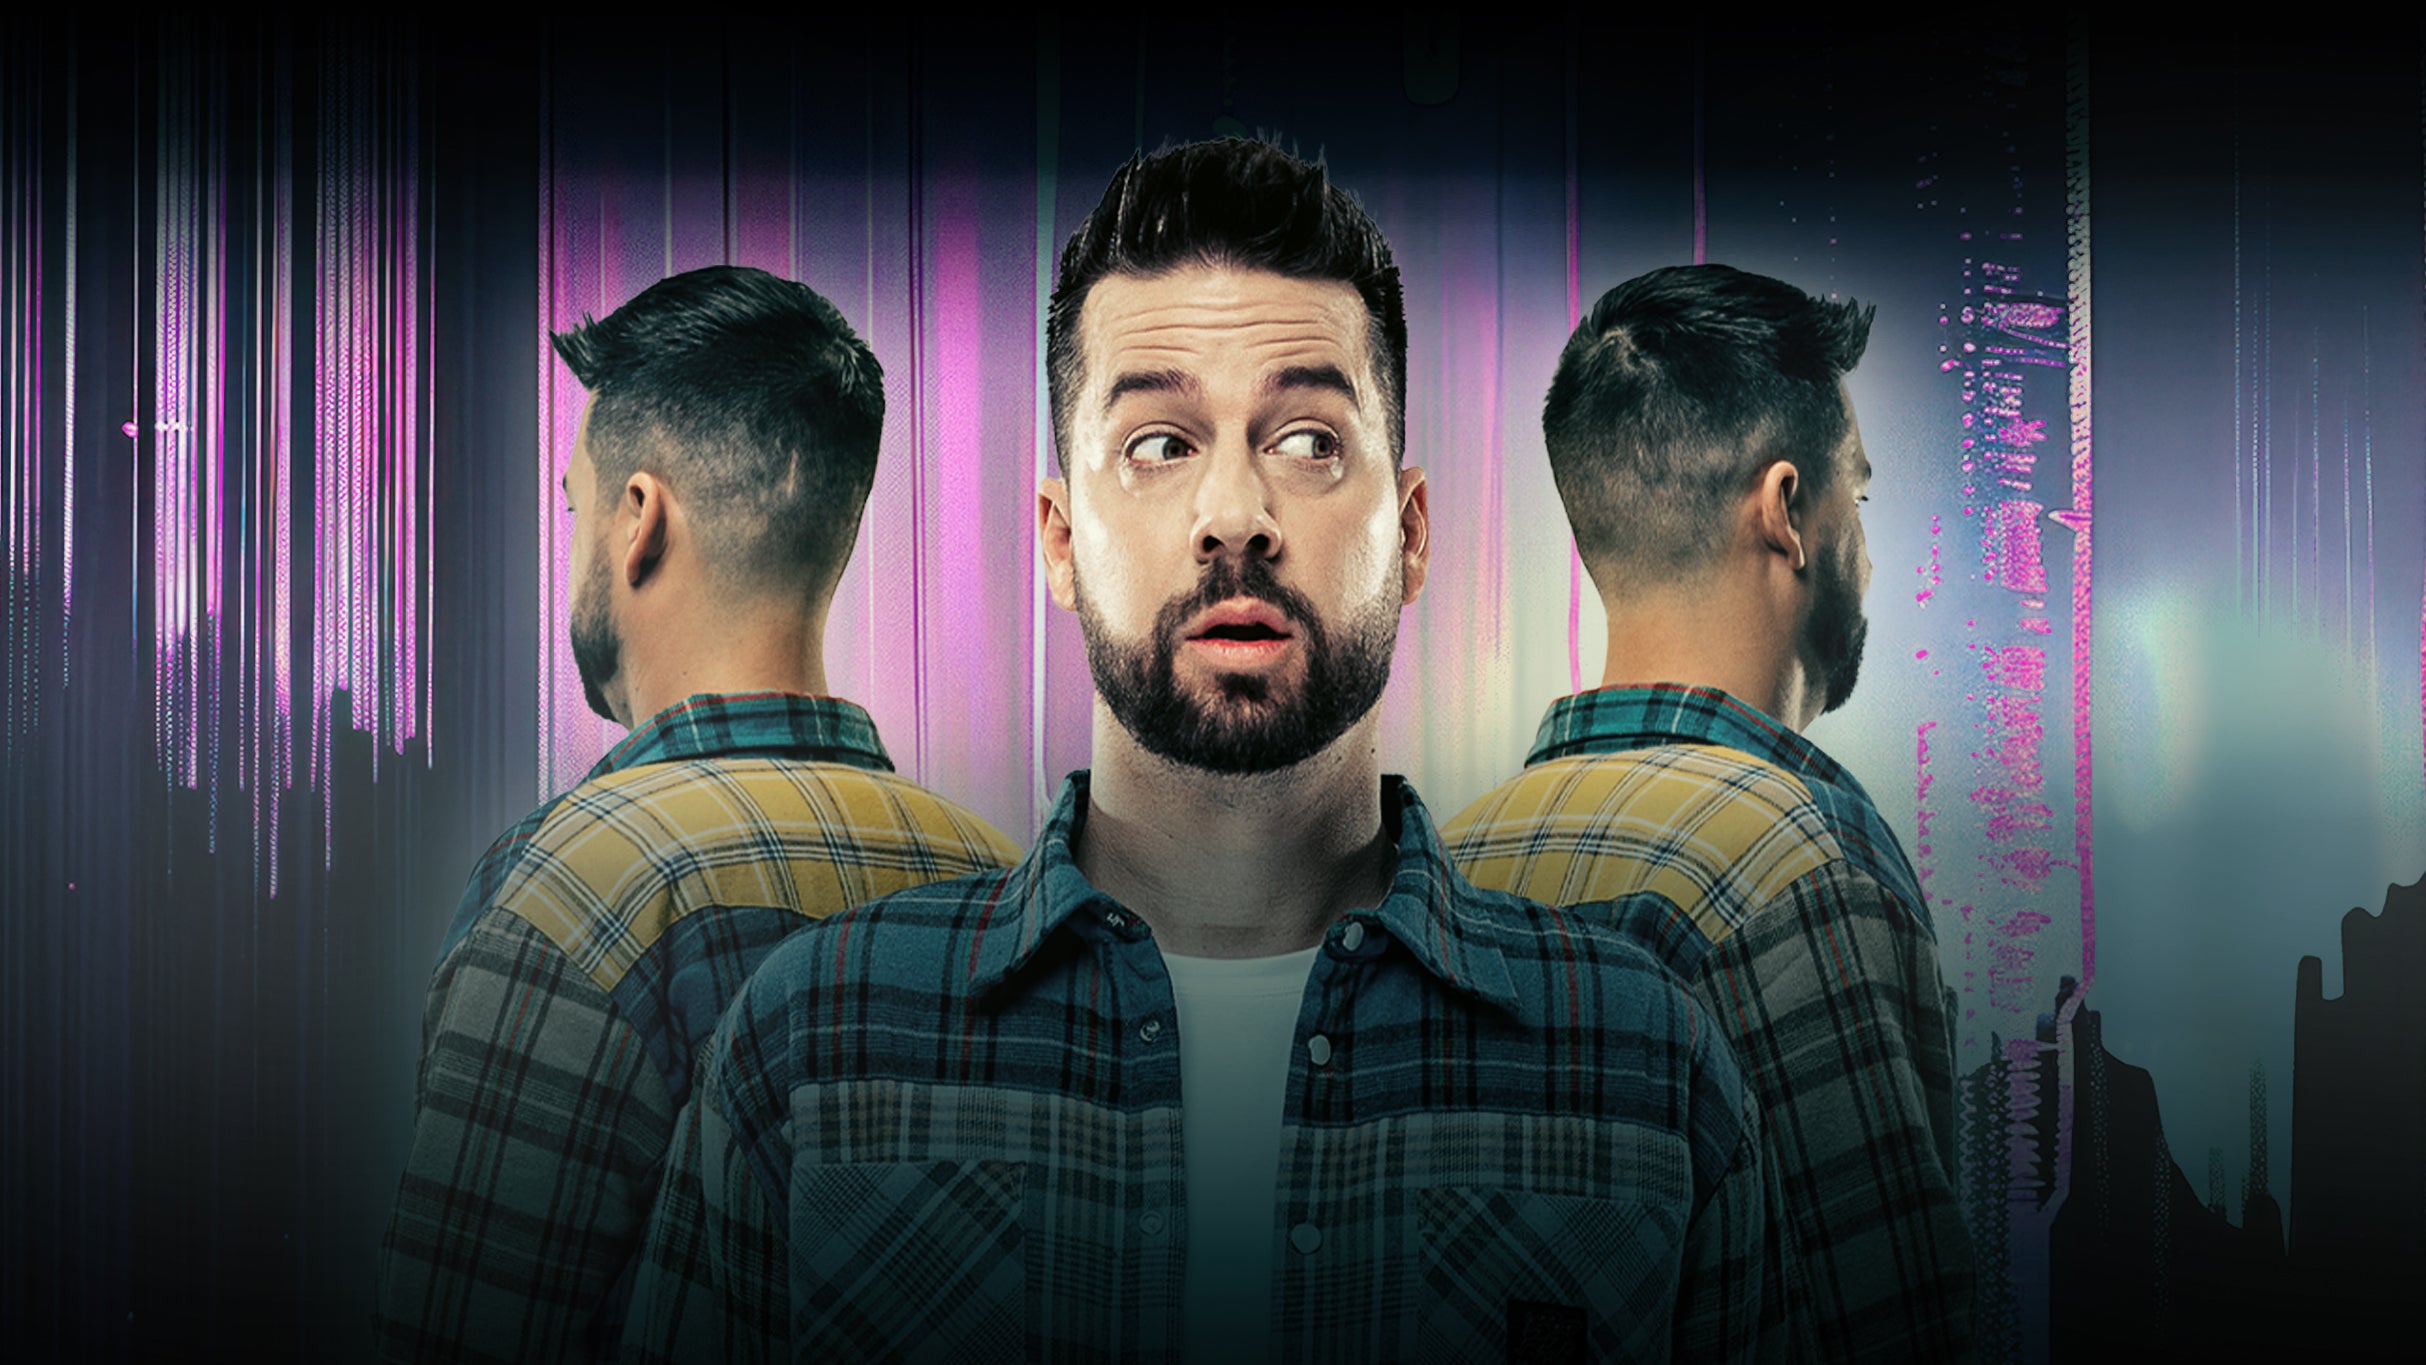 John Crist: Special Taping in Duluth promo photo for Official Platinum presale offer code